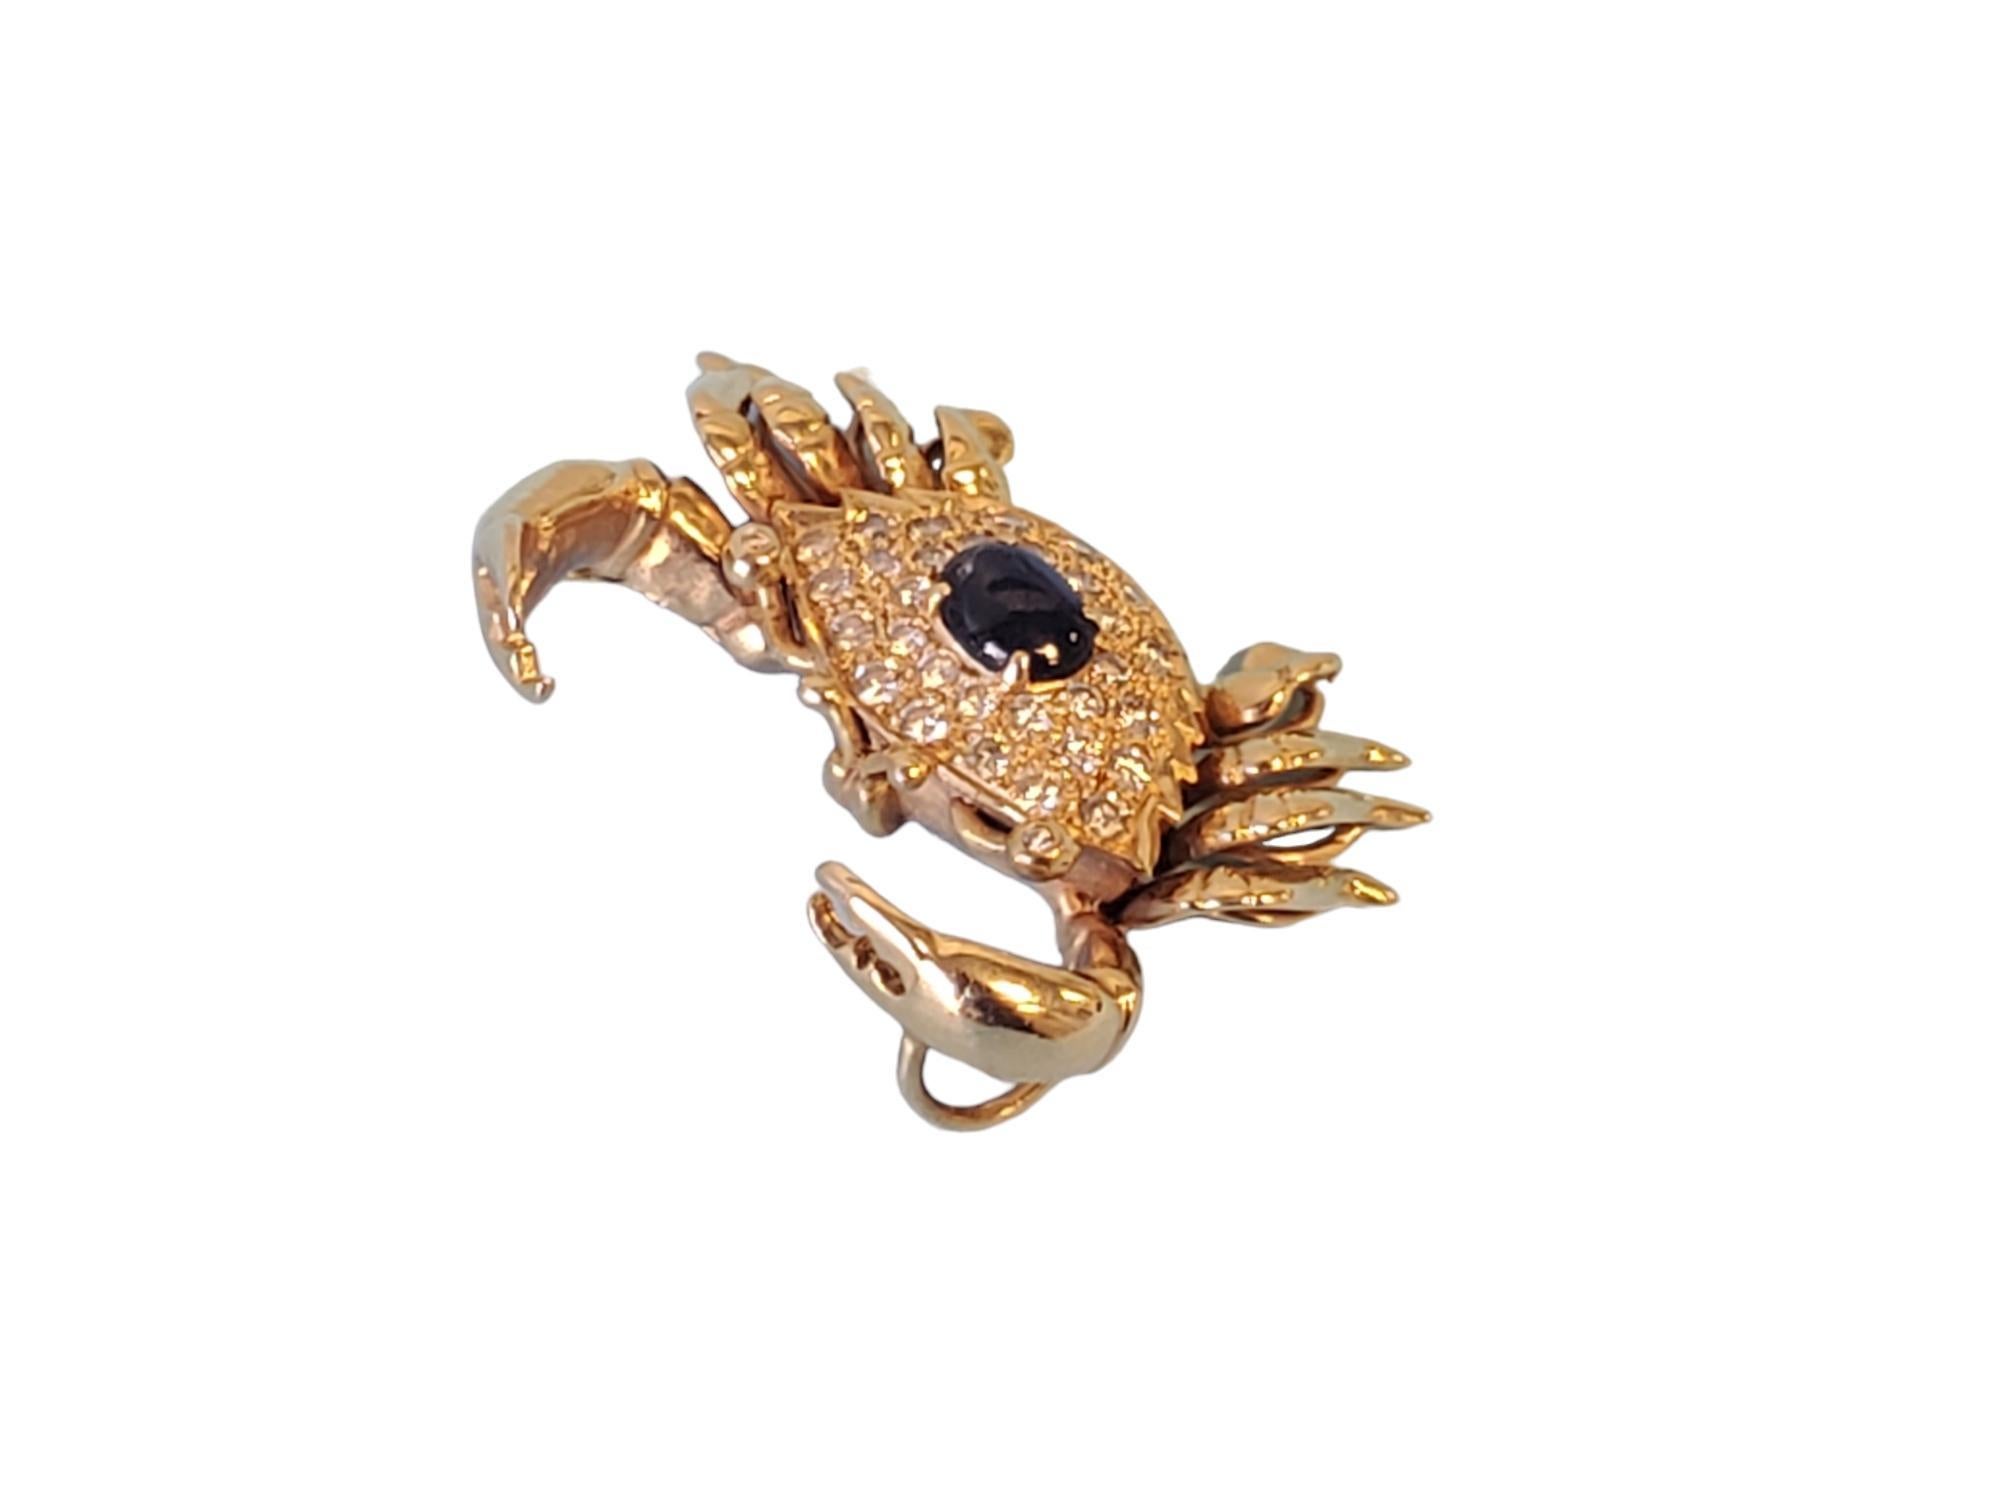 Listed is a vintage crab slide pendant in 14k yellow gold. The piece is in excellent condition and features approximately 1tcw diamonds H VS quality round brilliant diamonds with an approximately .75-1ct blue oval sapphire cabochon. Its a wonderful